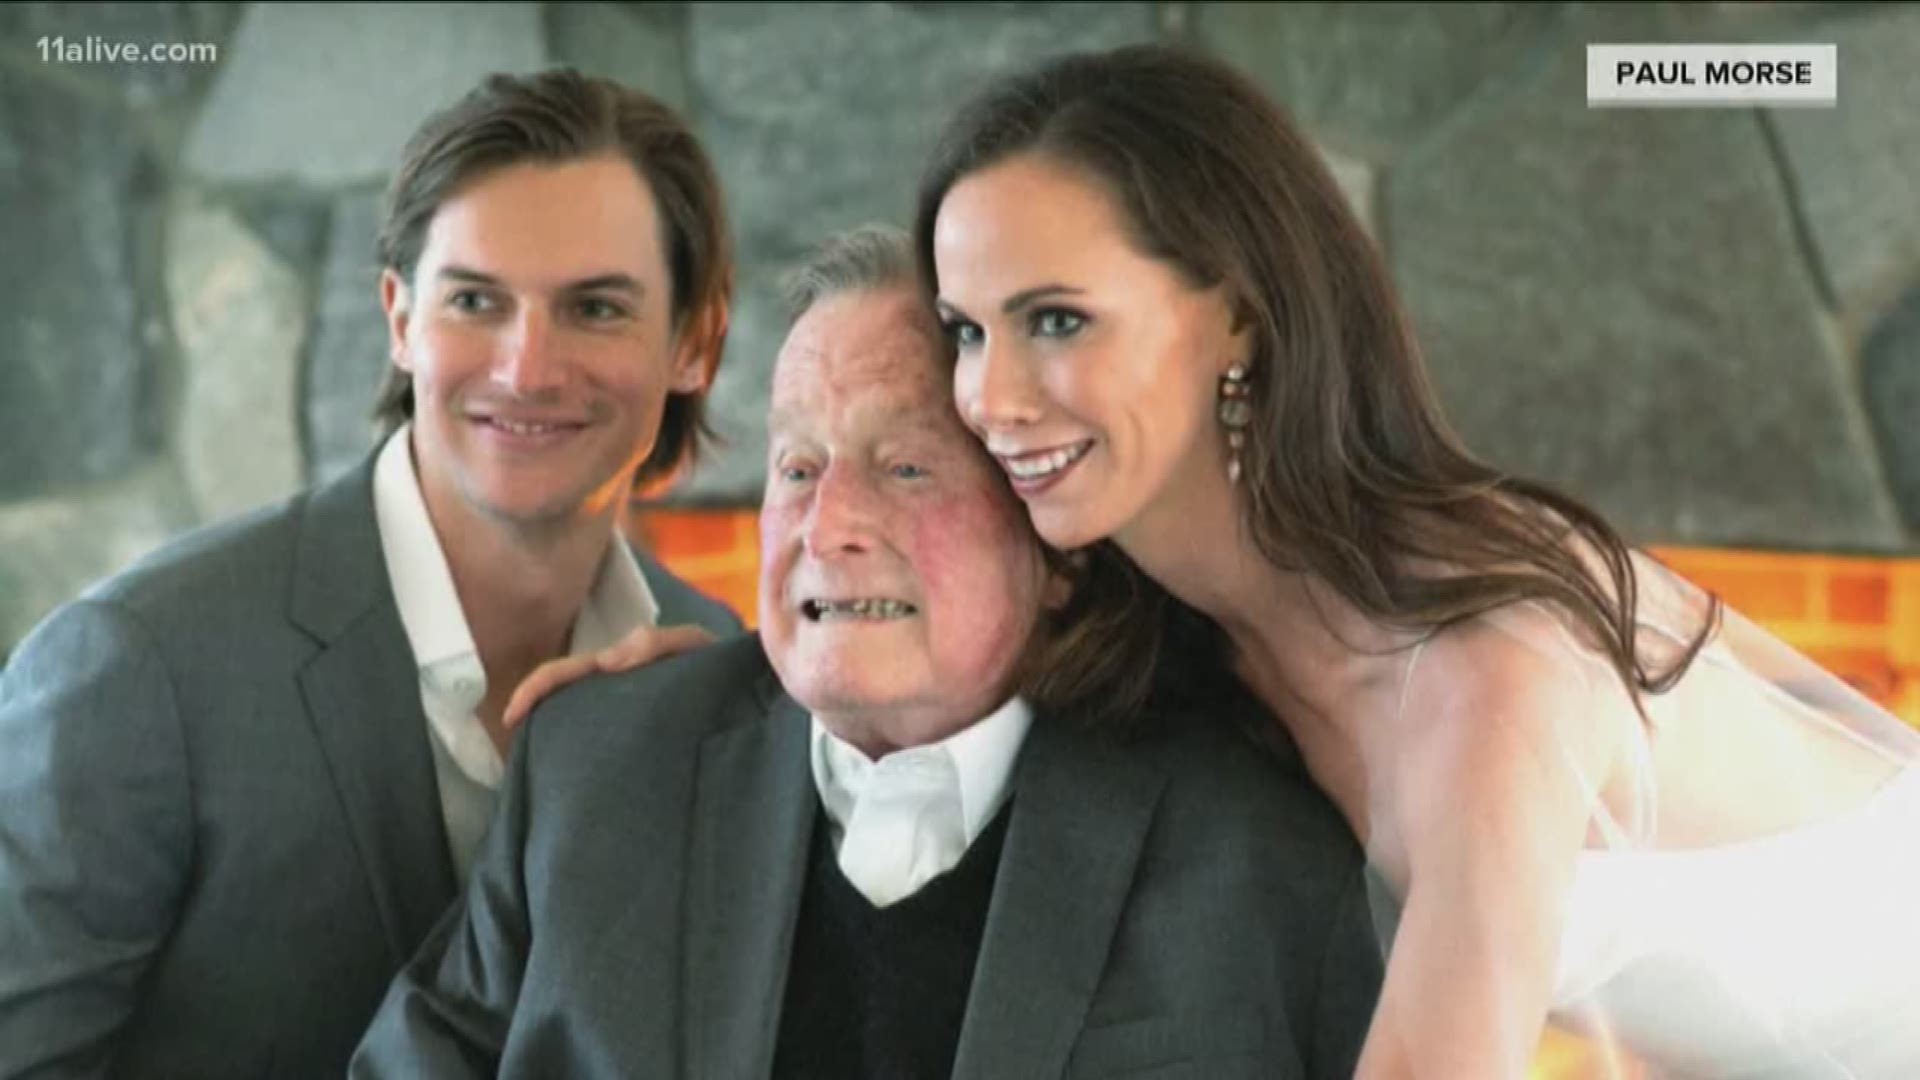 Former President George W. Bush's daughter Barbara Pierce Bush was married to Craig Louis Coyne over the weekend in a secret ceremony.